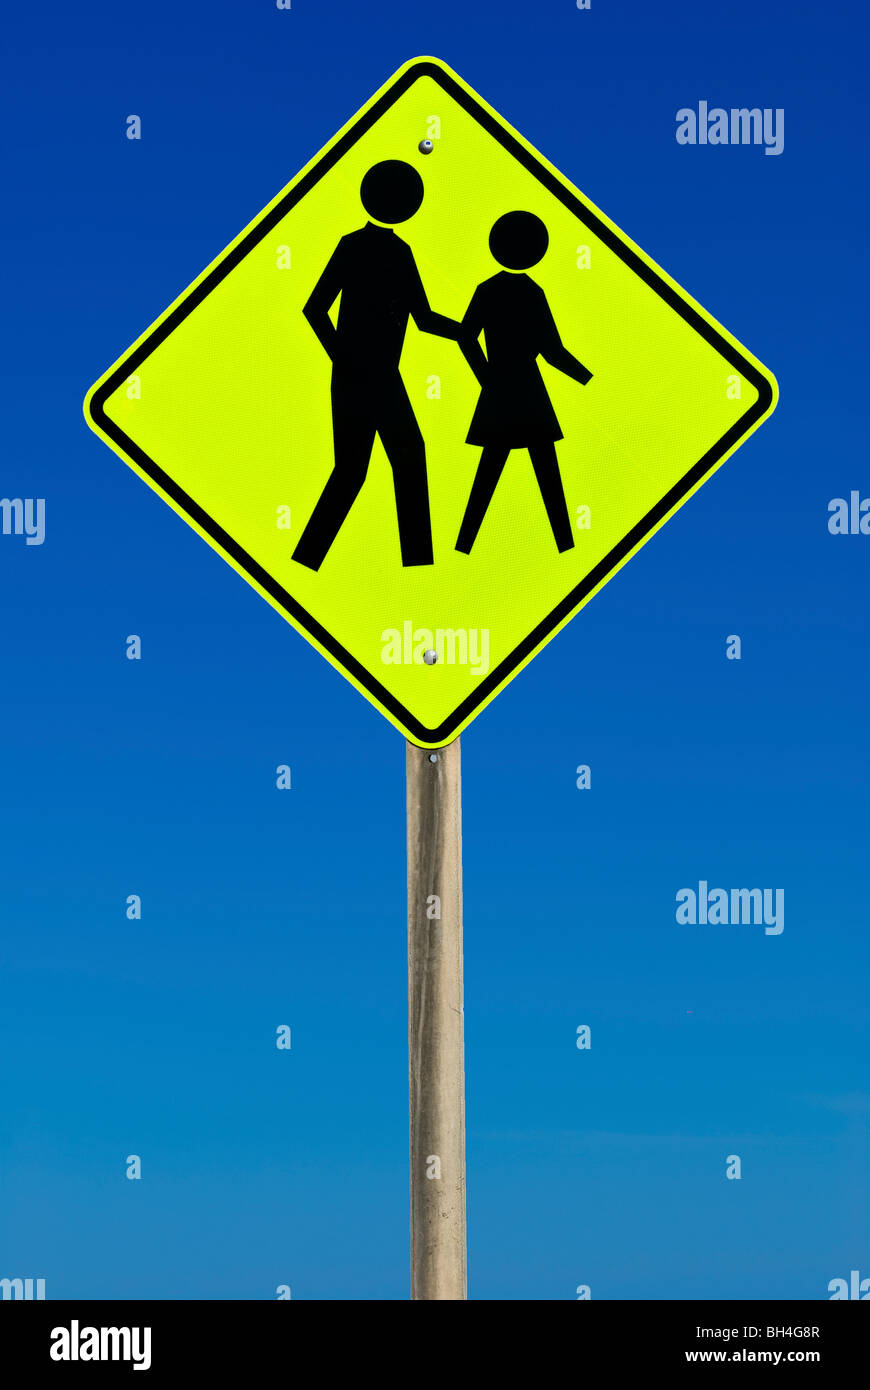 Pedestrian Crossing Sign isolated on a blue gradient sky Stock Photo